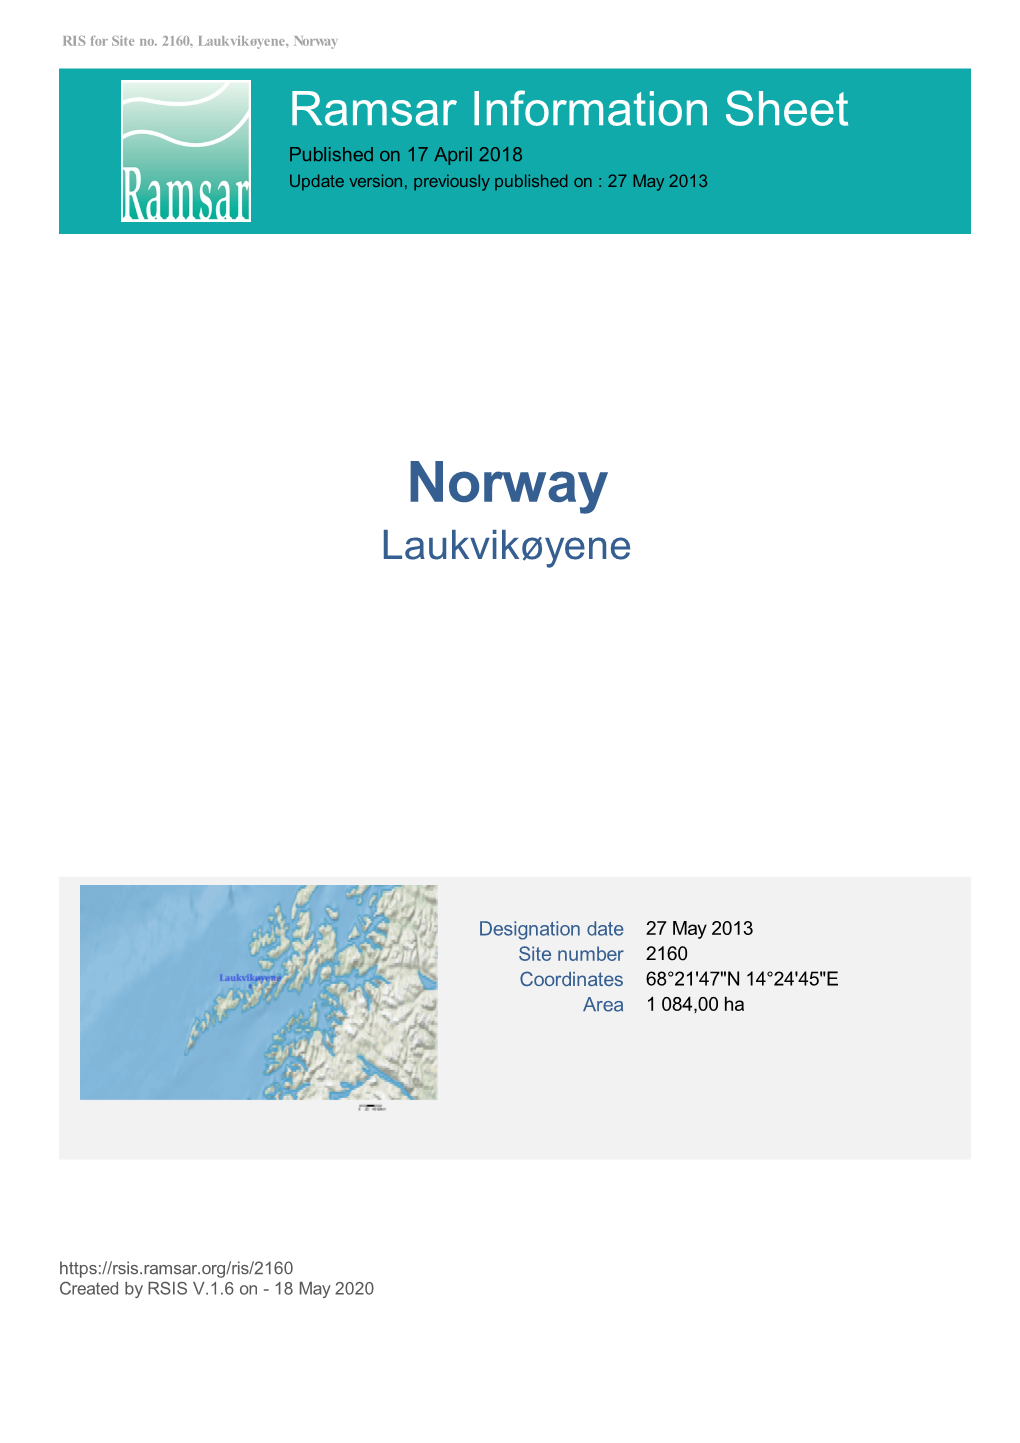 Norway Ramsar Information Sheet Published on 17 April 2018 Update Version, Previously Published on : 27 May 2013